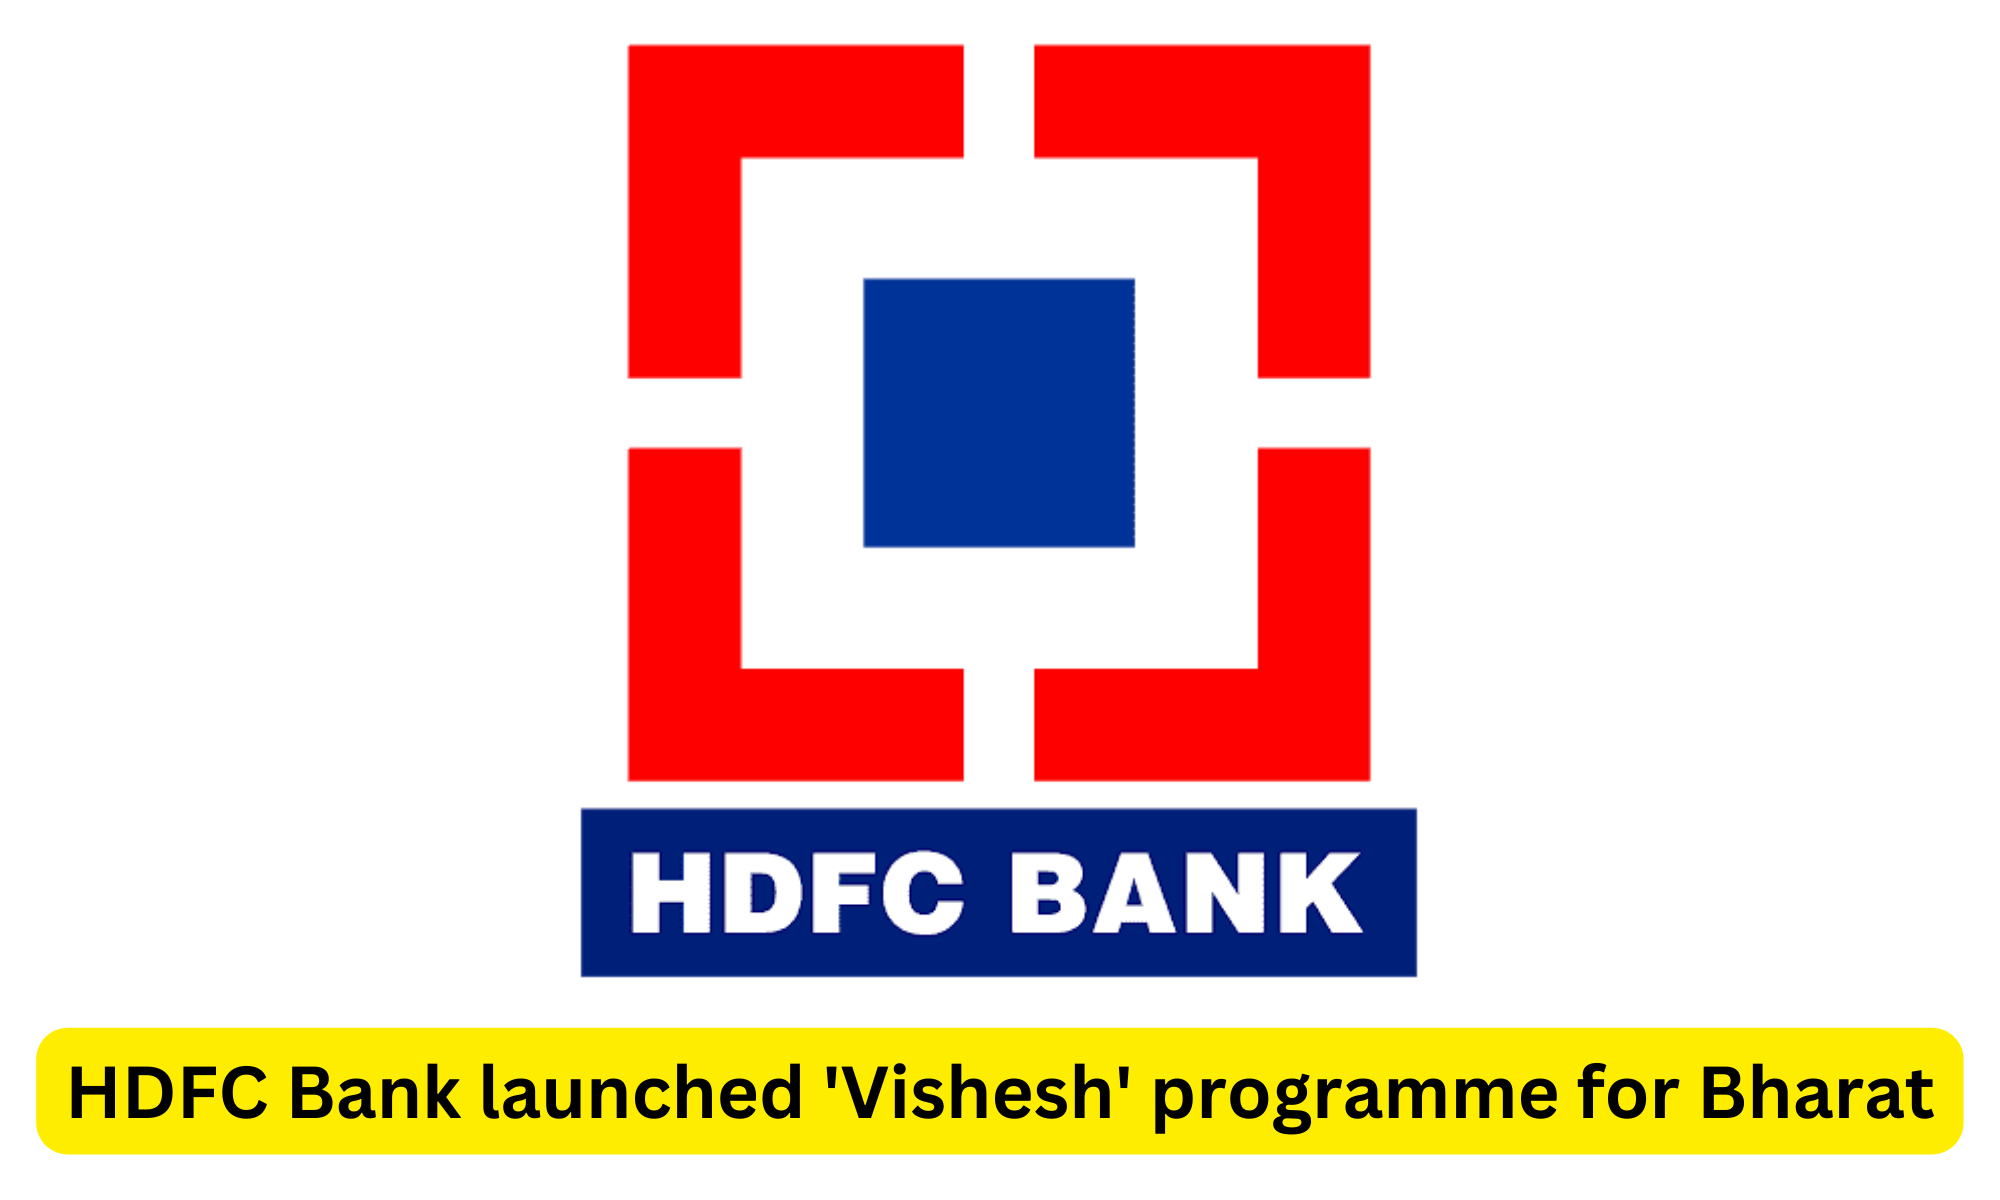 HDFC Bank launched programme for Bharat